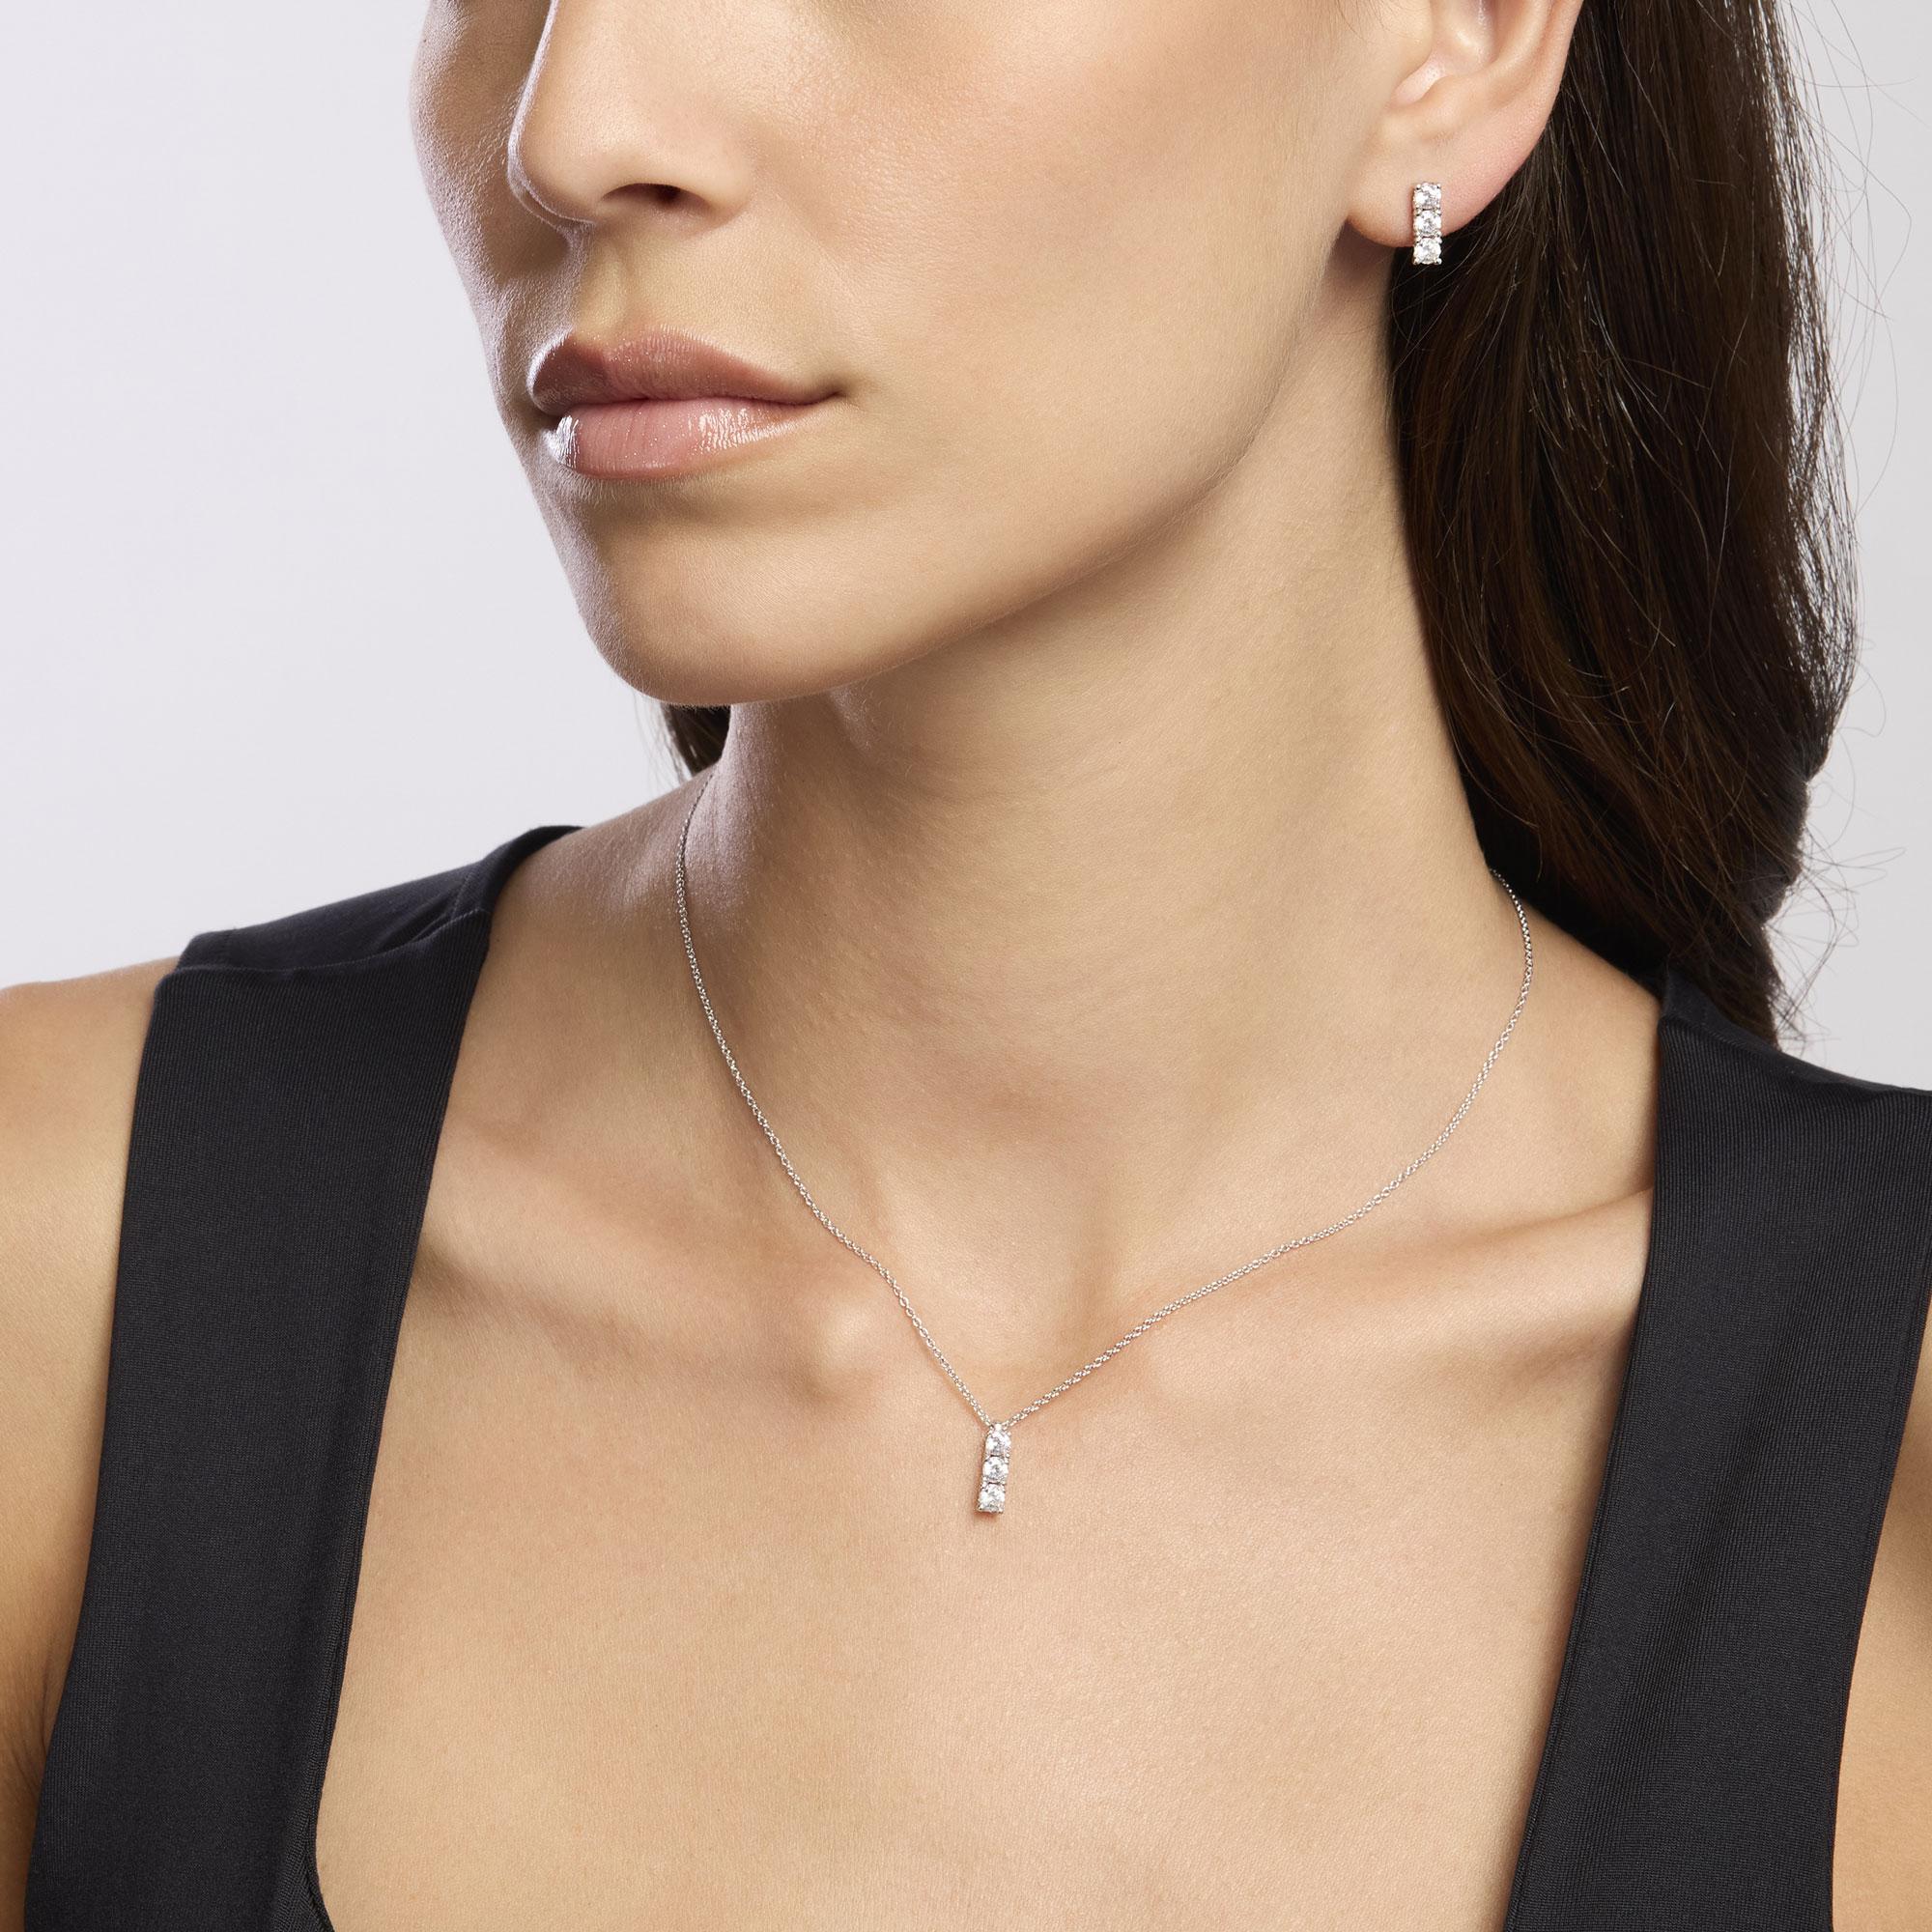 Mabina Woman - Choker in rhodium-plated silver with forzatina chain and white zircons TRILOGY - 553643